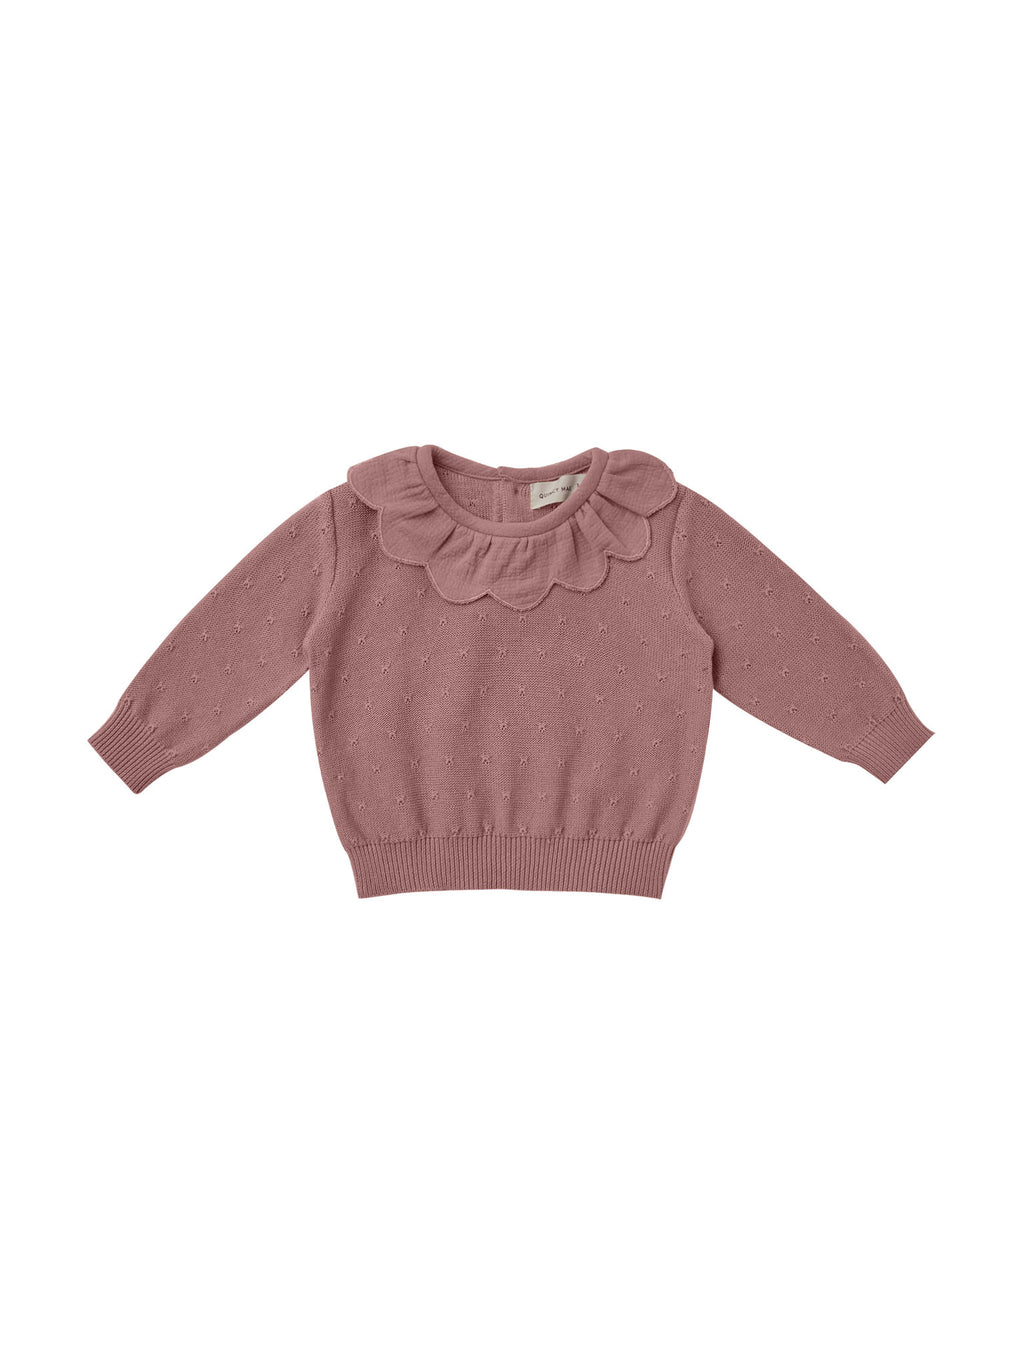 Quincy Mae Petal Knit Sweater - Fig